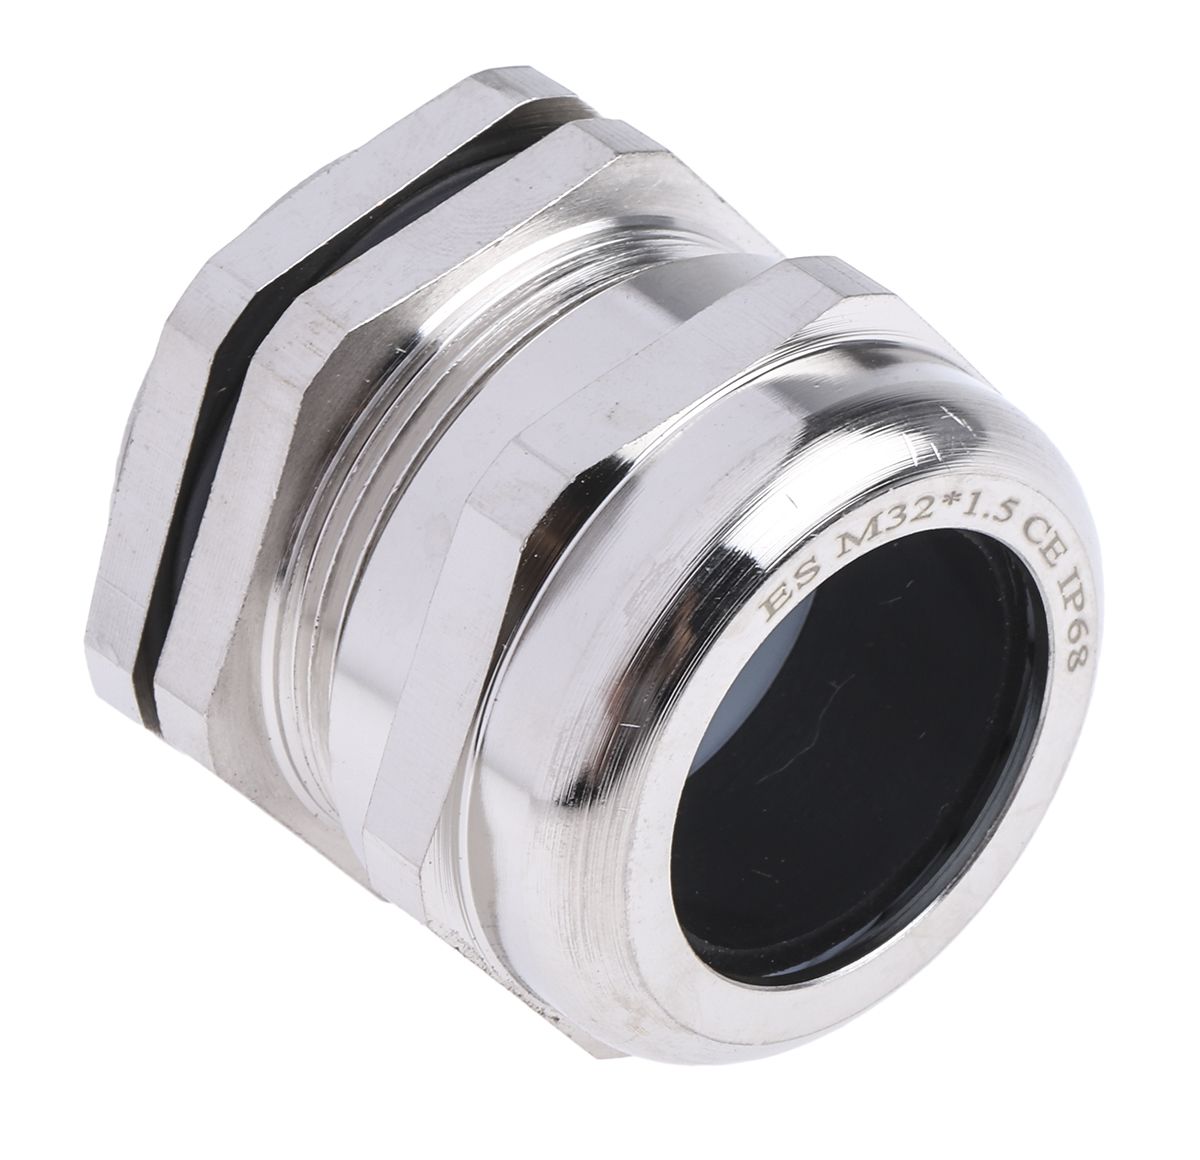 RS PRO Metallic Nickel Plated Brass Cable Gland, M32 Thread, 15mm Min, 22mm Max, IP68